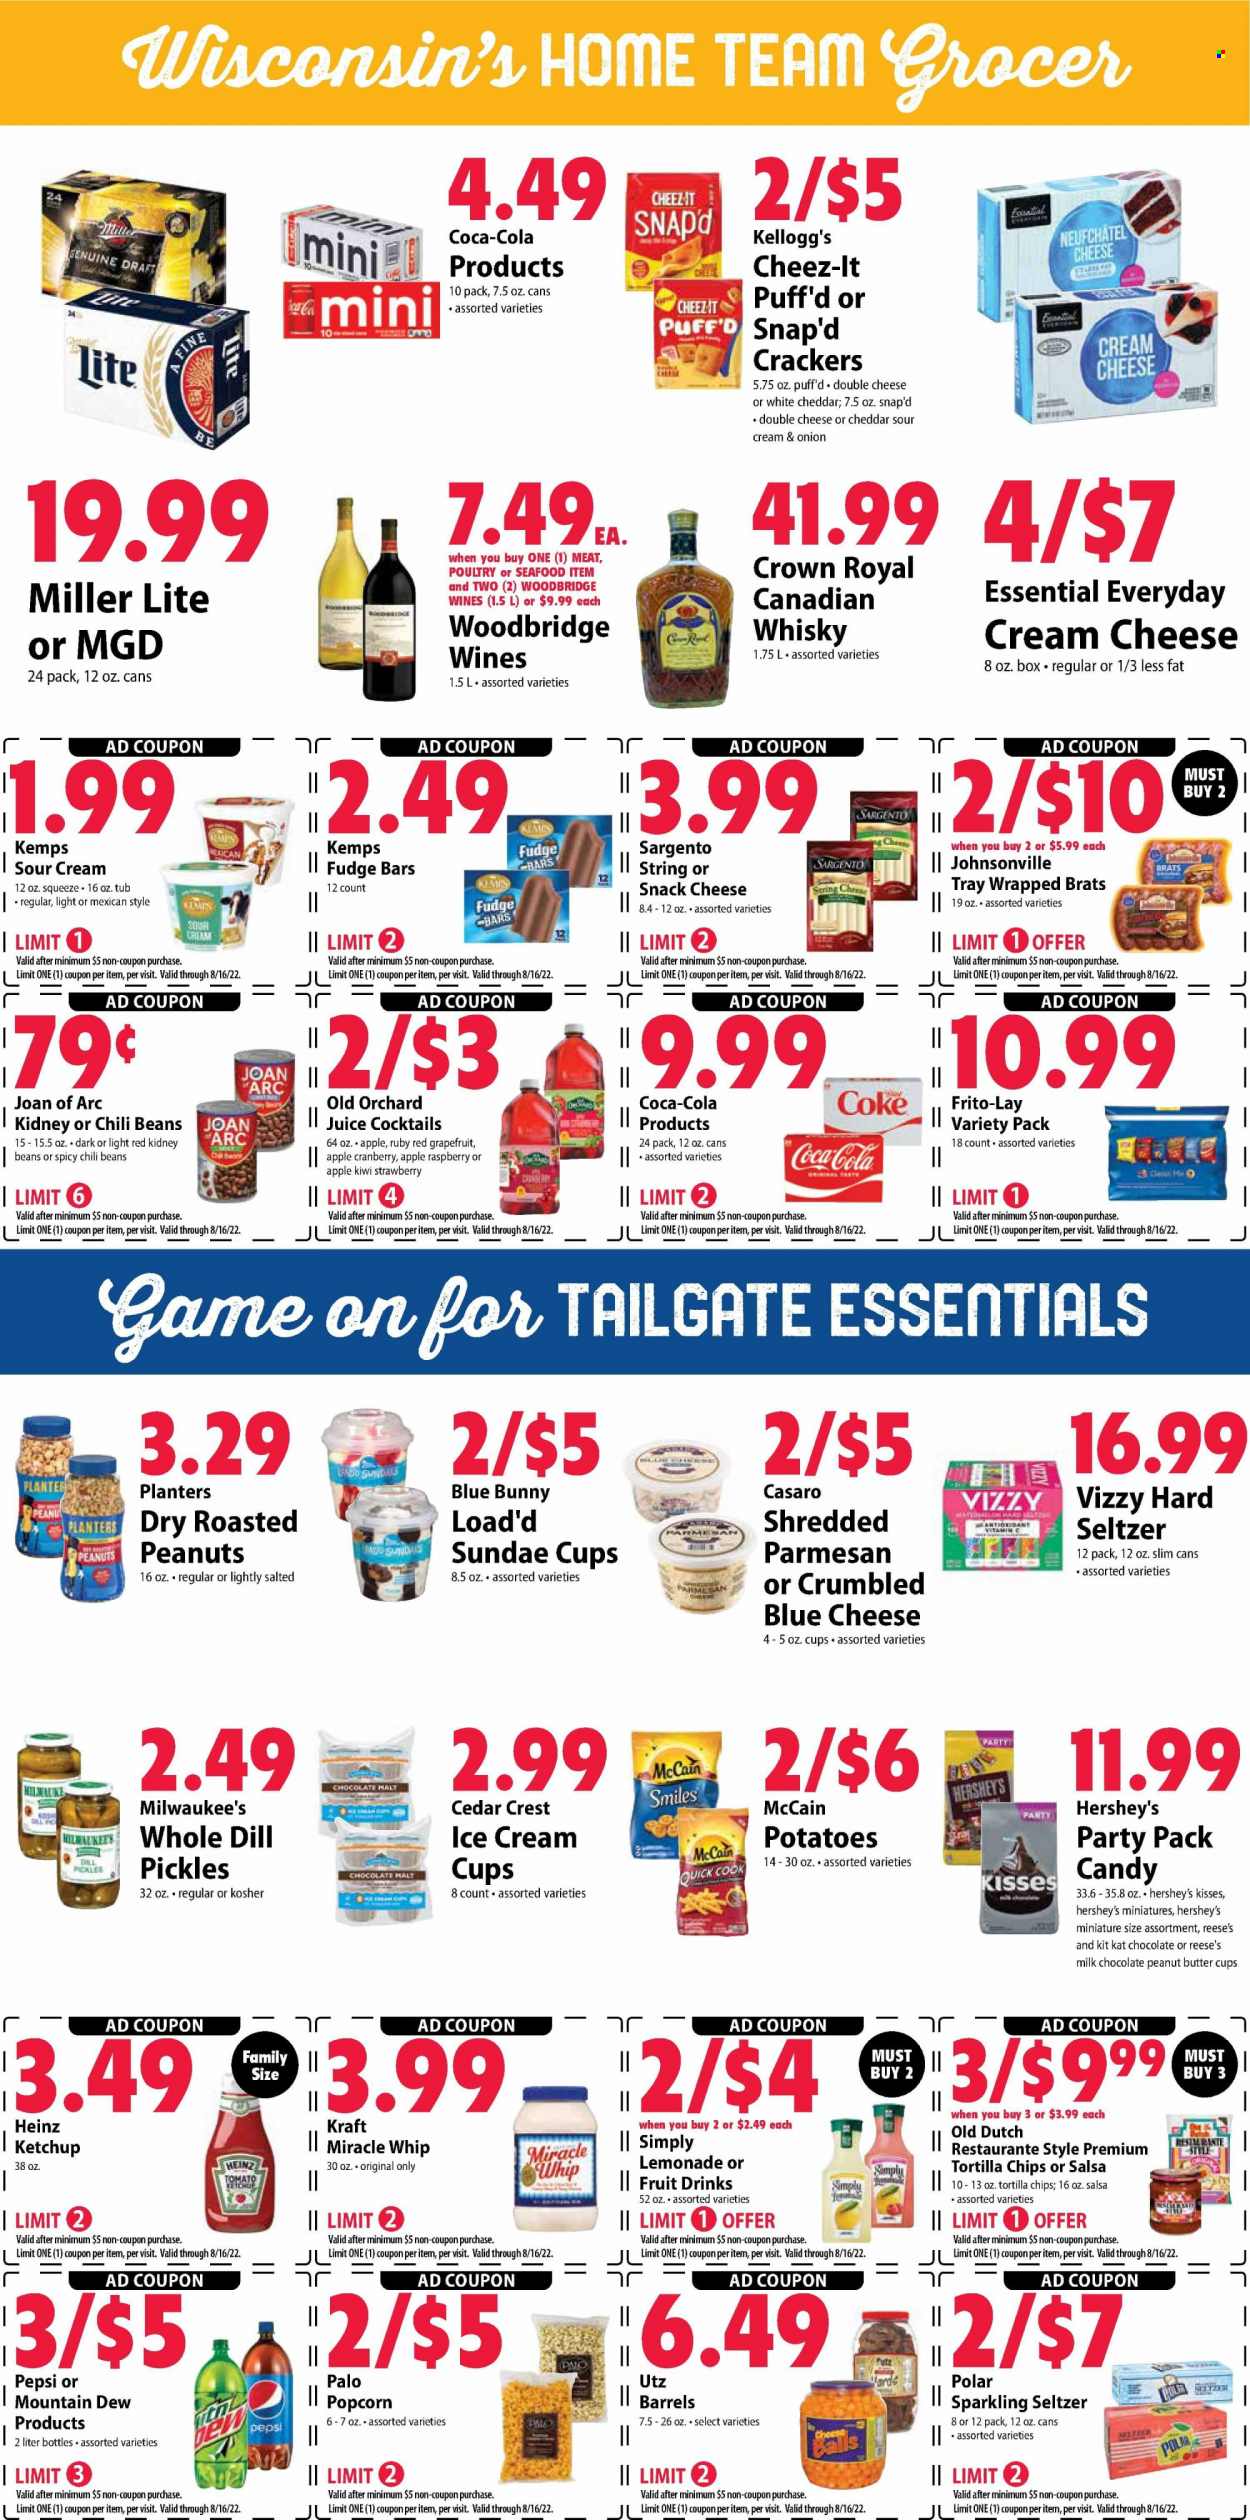 thumbnail - Festival Foods Flyer - 08/10/2022 - 08/16/2022 - Sales products - beans, potatoes, kiwi, seafood, Kraft®, Johnsonville, blue cheese, cream cheese, Neufchâtel, parmesan, Kemps, Sargento, Miracle Whip, ice cream, Reese's, Hershey's, Blue Bunny, McCain, fudge, milk chocolate, KitKat, crackers, Kellogg's, peanut butter cups, tortilla chips, chips, popcorn, Frito-Lay, Cheez-It, Heinz, kidney beans, pickles, chili beans, dill, ketchup, salsa, roasted peanuts, peanuts, Planters, Coca-Cola, lemonade, Mountain Dew, Pepsi, juice, Woodbridge, canadian whisky, Hard Seltzer, whisky, beer, Crest, vitamin c, Miller Lite. Page 5.